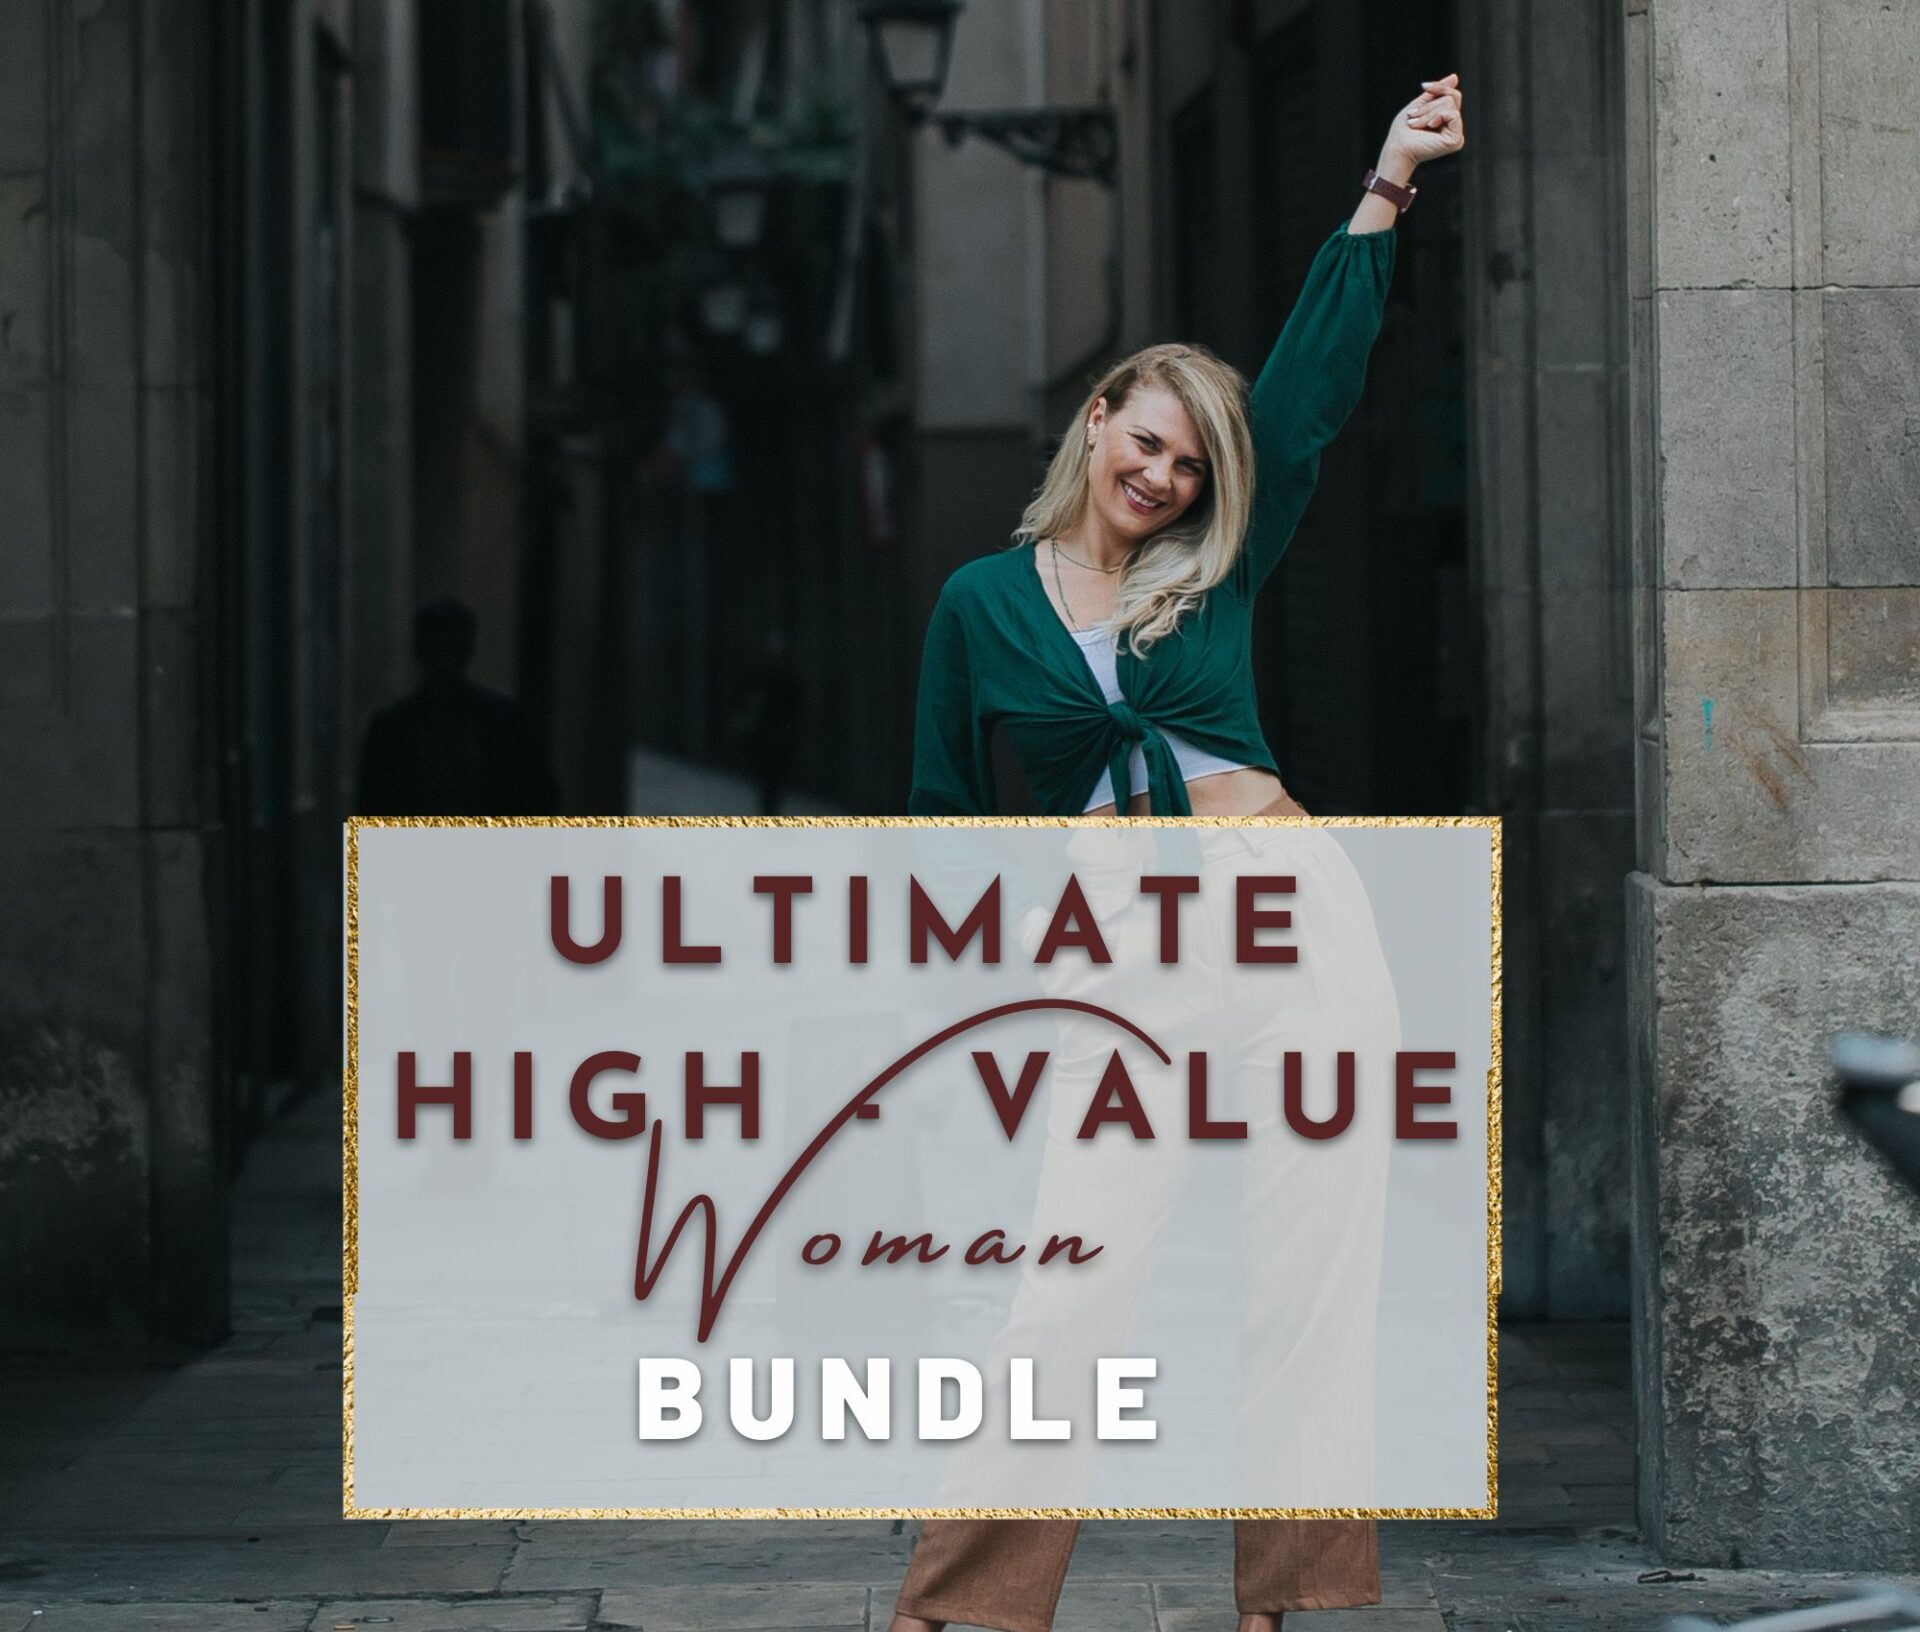 Ultimate High Value Woman Bundle Selbstbewusst Stark Persoenlichkeitsentwicklung Coaching Life Coaching Nicole Davidow mobil